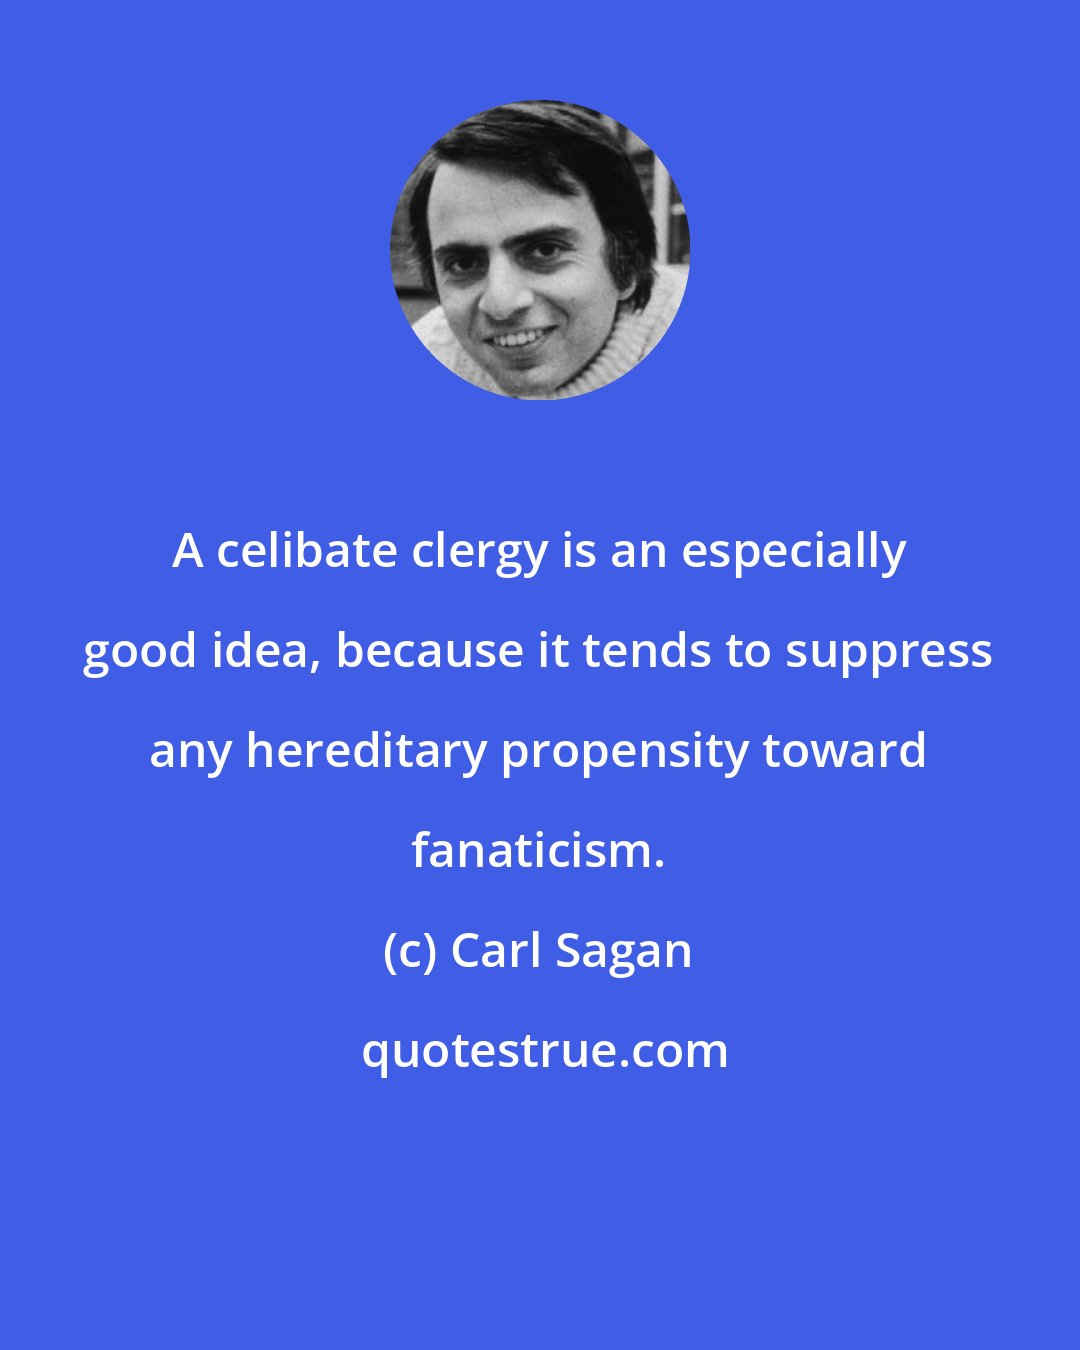 Carl Sagan: A celibate clergy is an especially good idea, because it tends to suppress any hereditary propensity toward fanaticism.